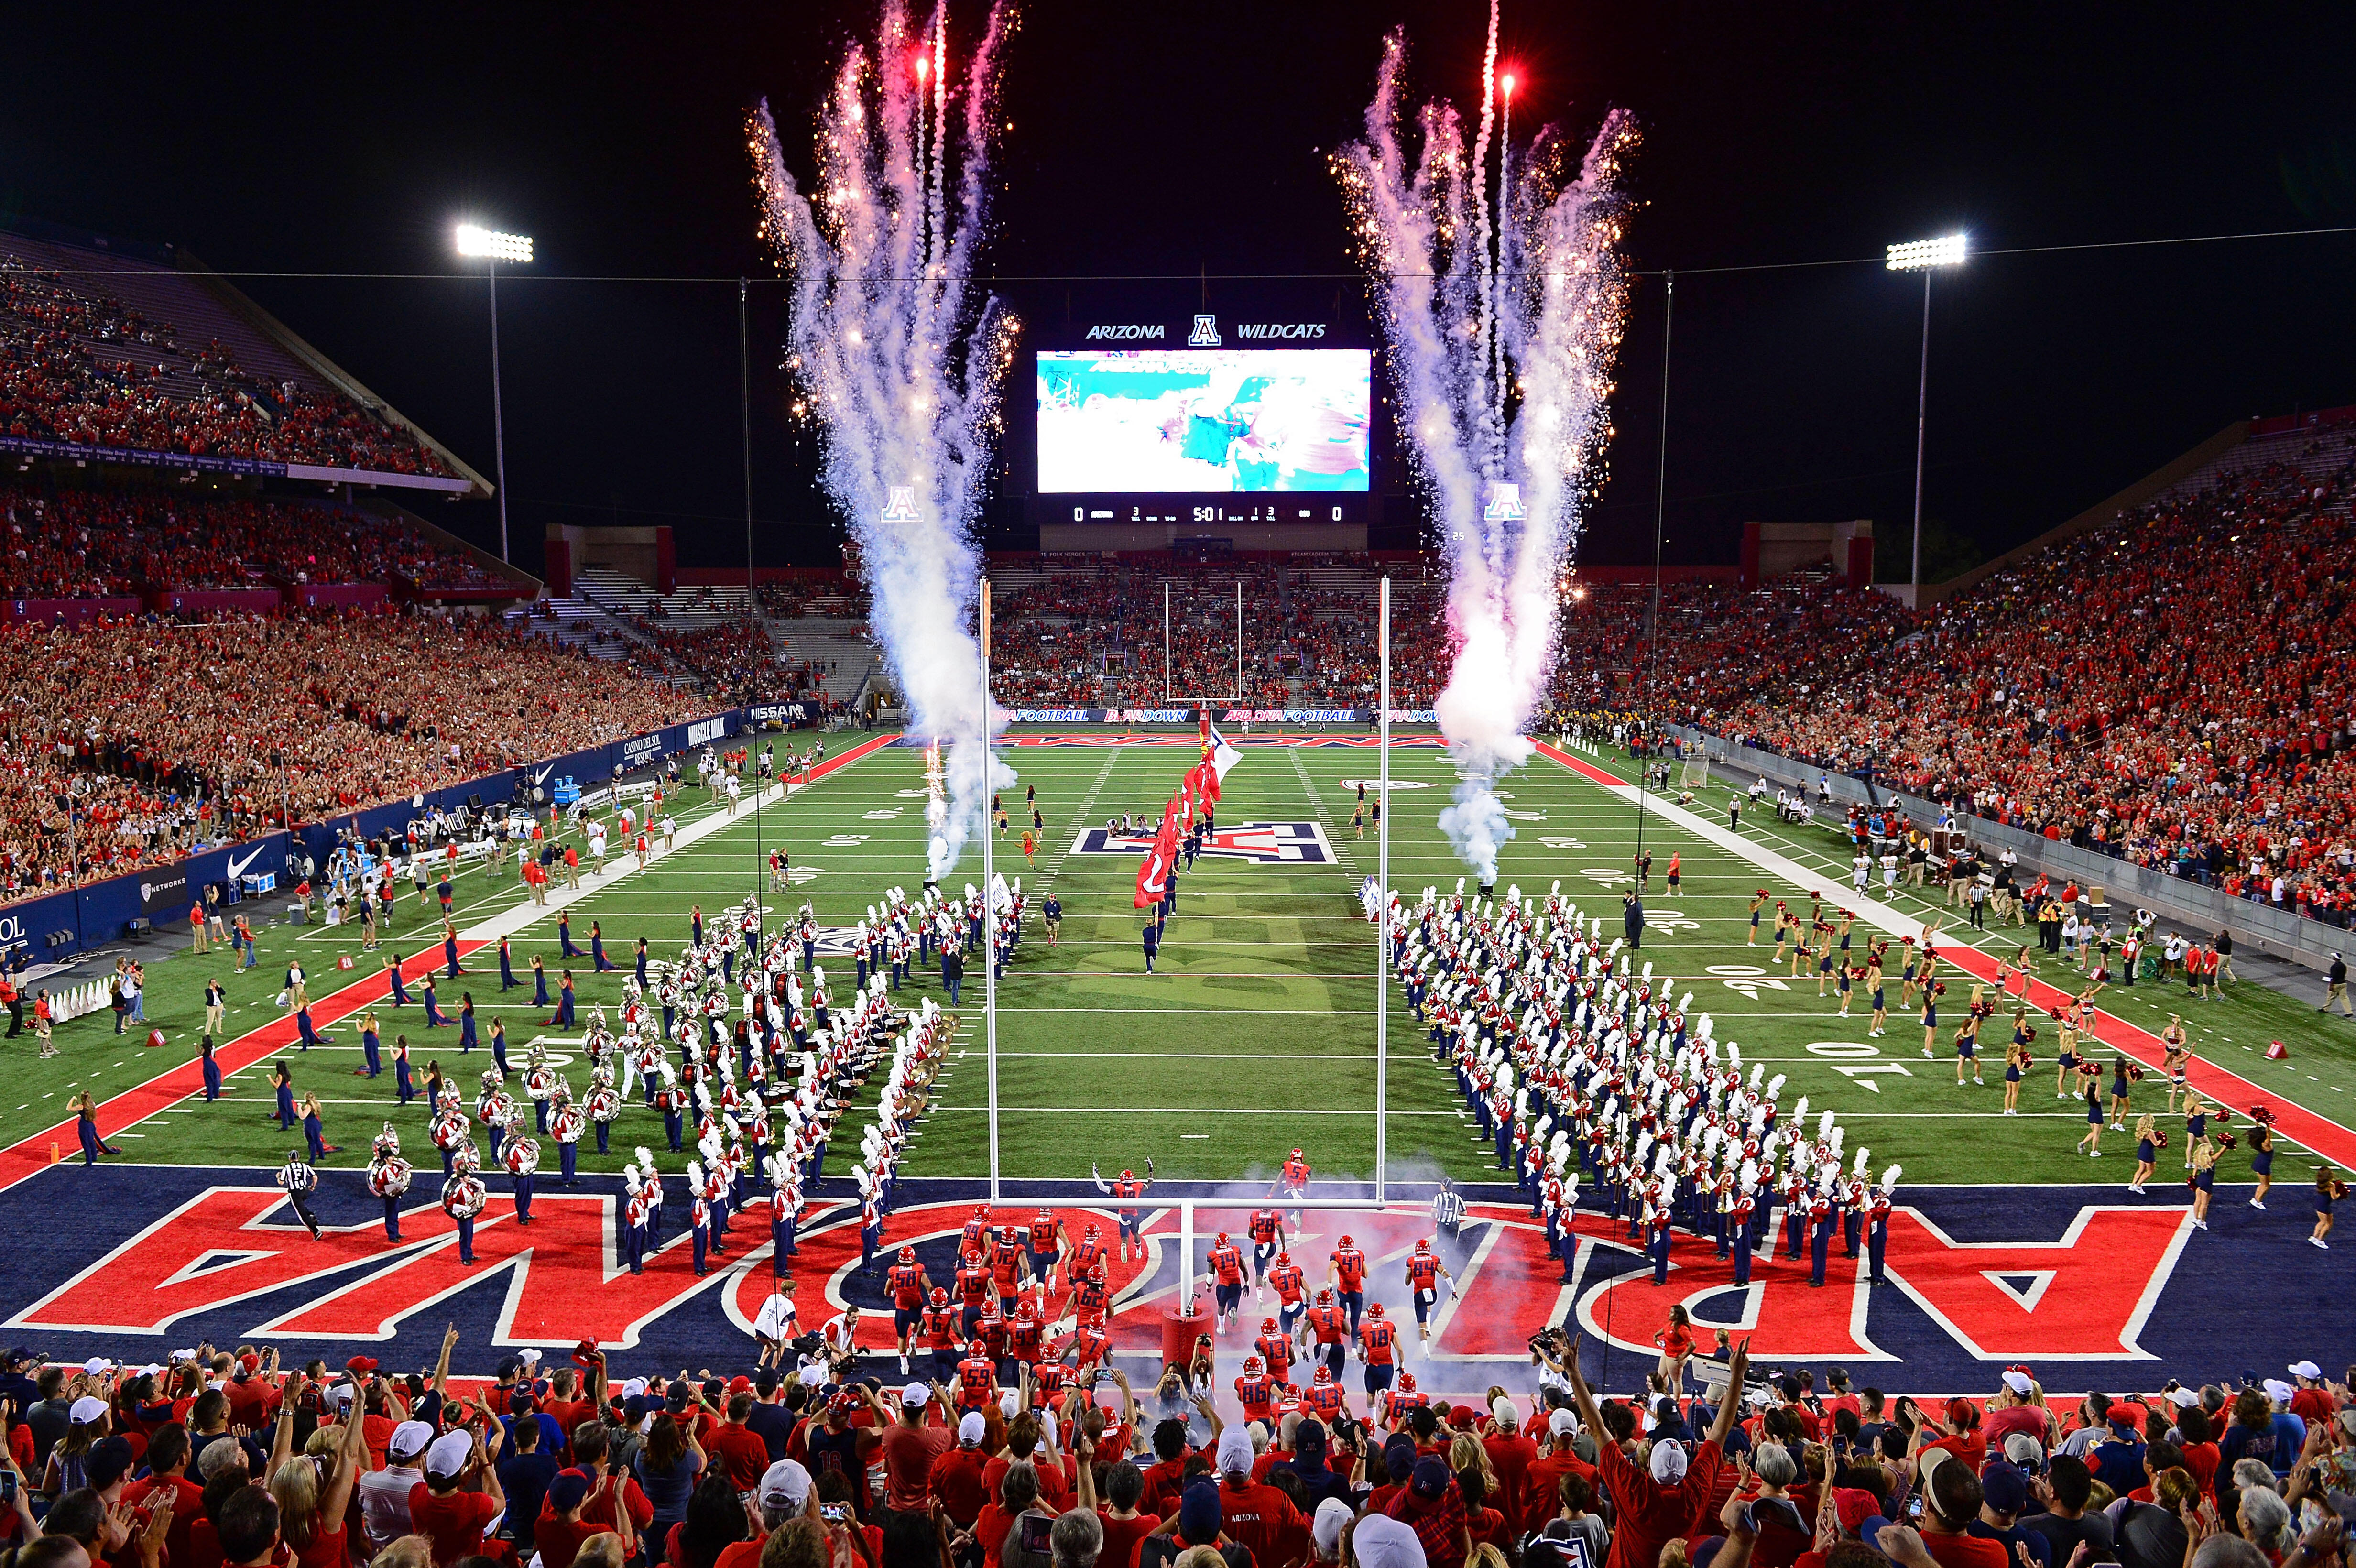 TUCSON, AZ - SEPTEMBER 10:  A general view as the Arizona Wildcats take the field for the game against the Grambling State Tigers at Arizona Stadium on September 10, 2016 in Tucson, Arizona.  (Photo by Jennifer Stewart/Getty Images)